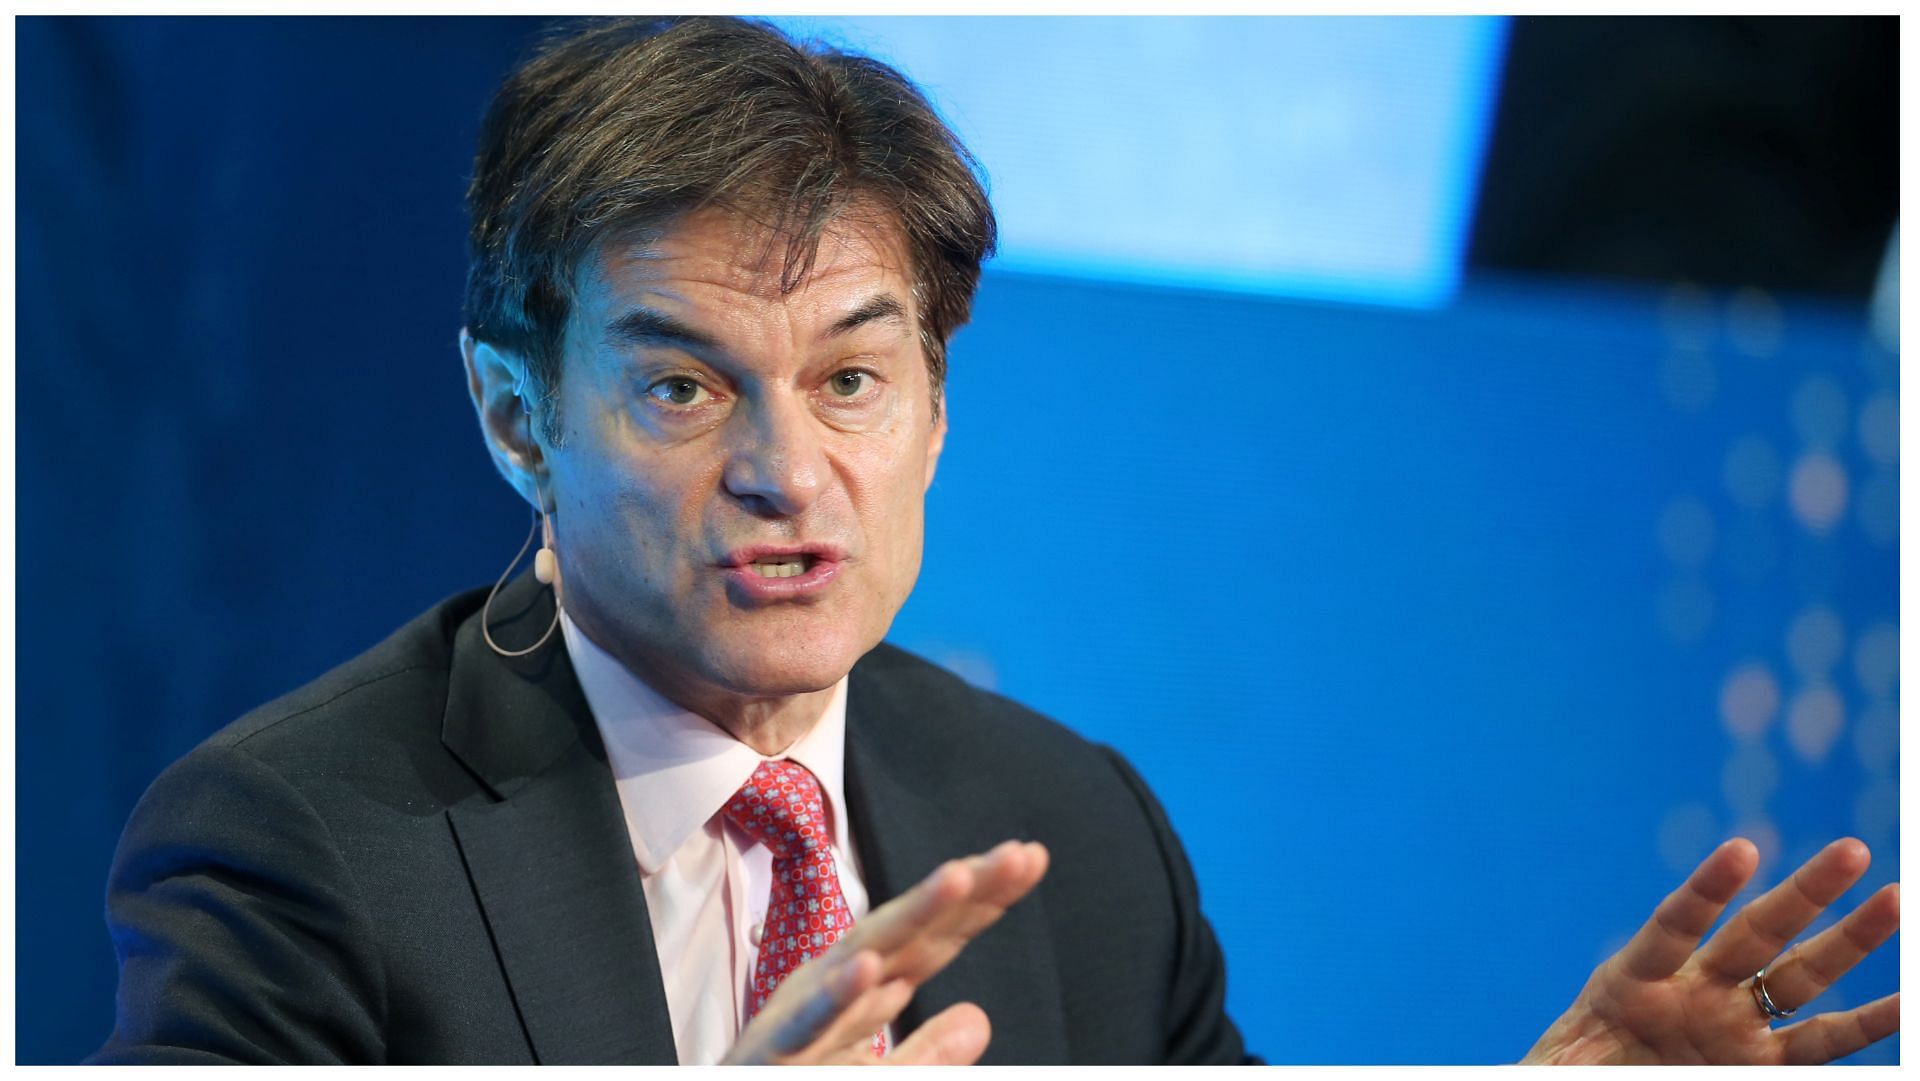 Celebrity physician and talk show host Dr. Oz is running for Senate in Pennsylvania as a Republican Candidate (image via Reuters)